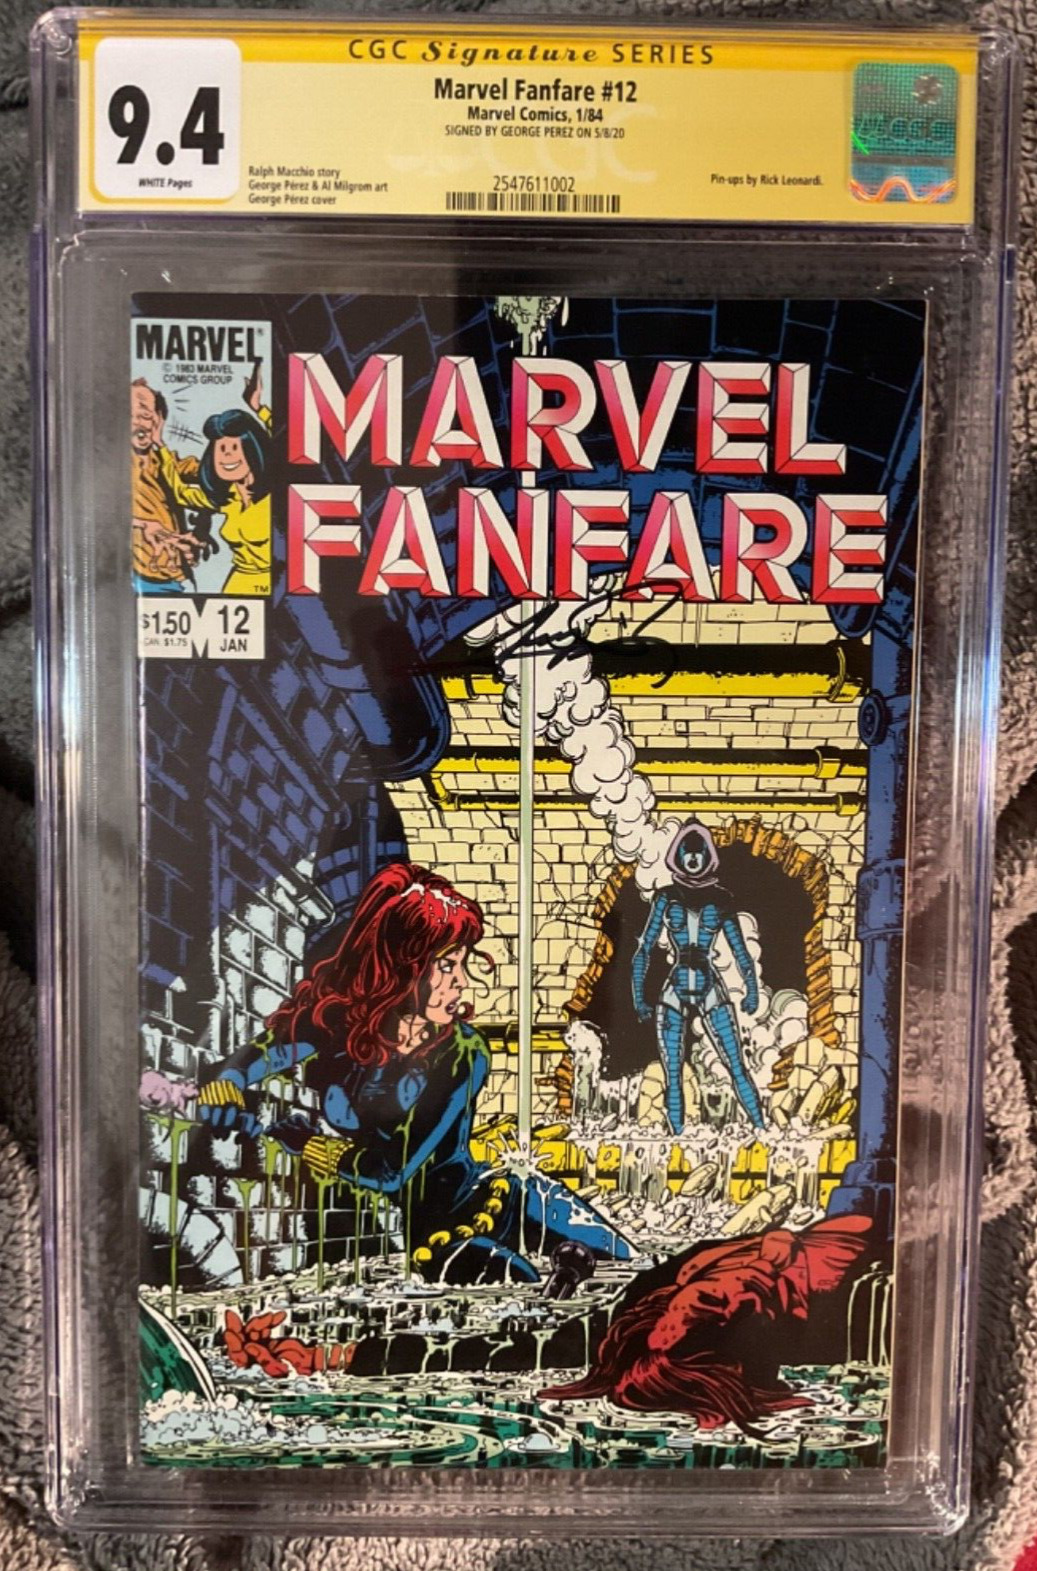 Marvel Fanfare 12 CGC 9.4. Signed by Artist George Perez